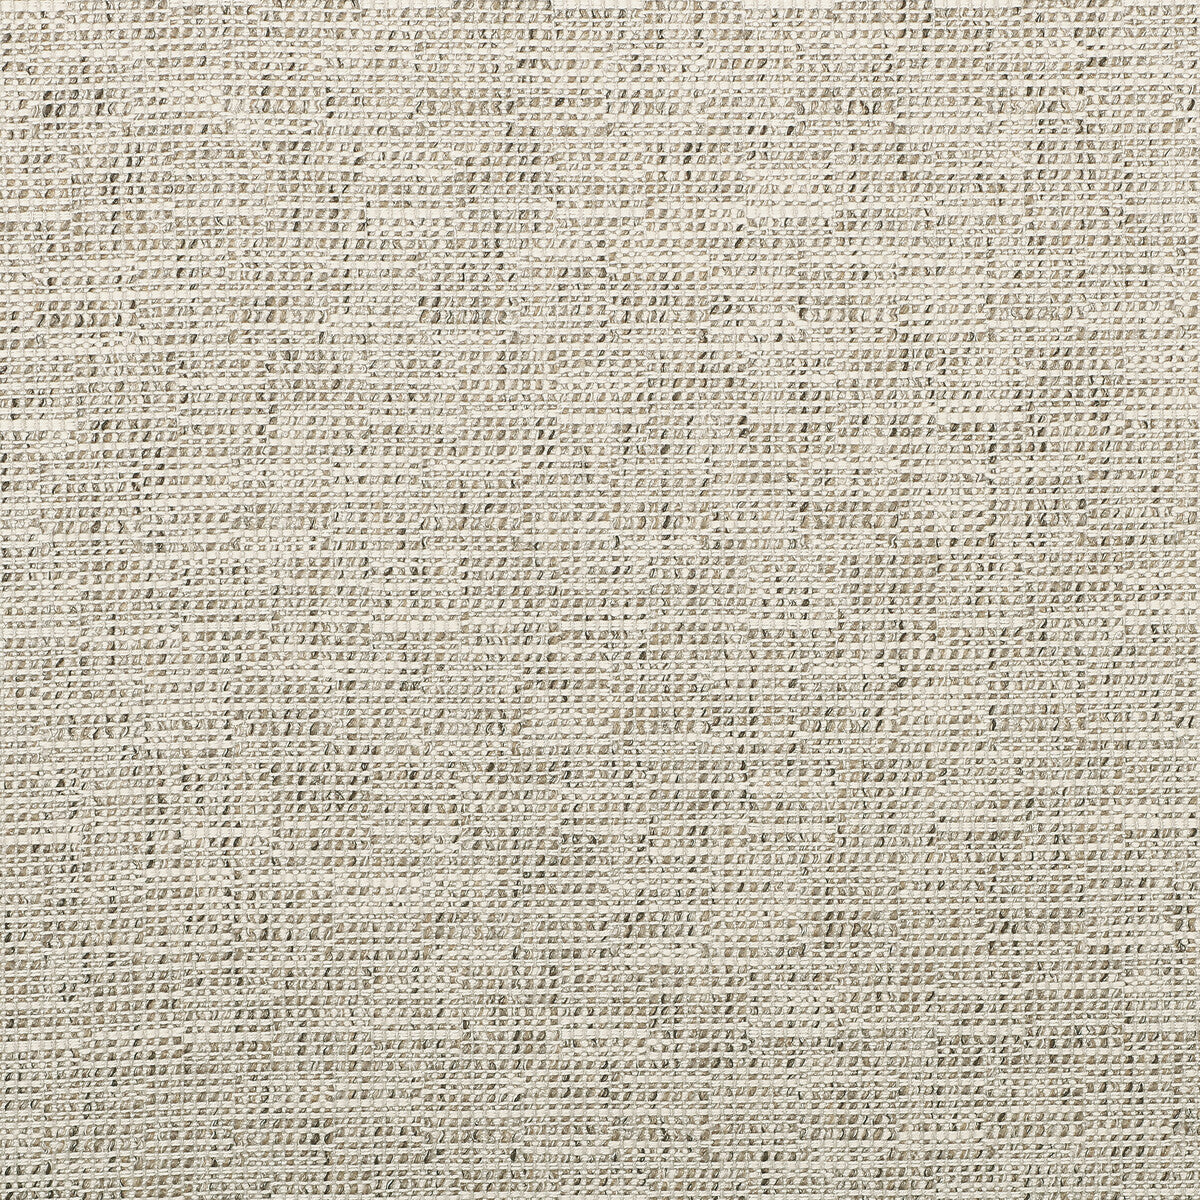 Kravet Smart fabric in 35518-1611 color - pattern 35518.1611.0 - by Kravet Smart in the Inside Out Performance Fabrics collection